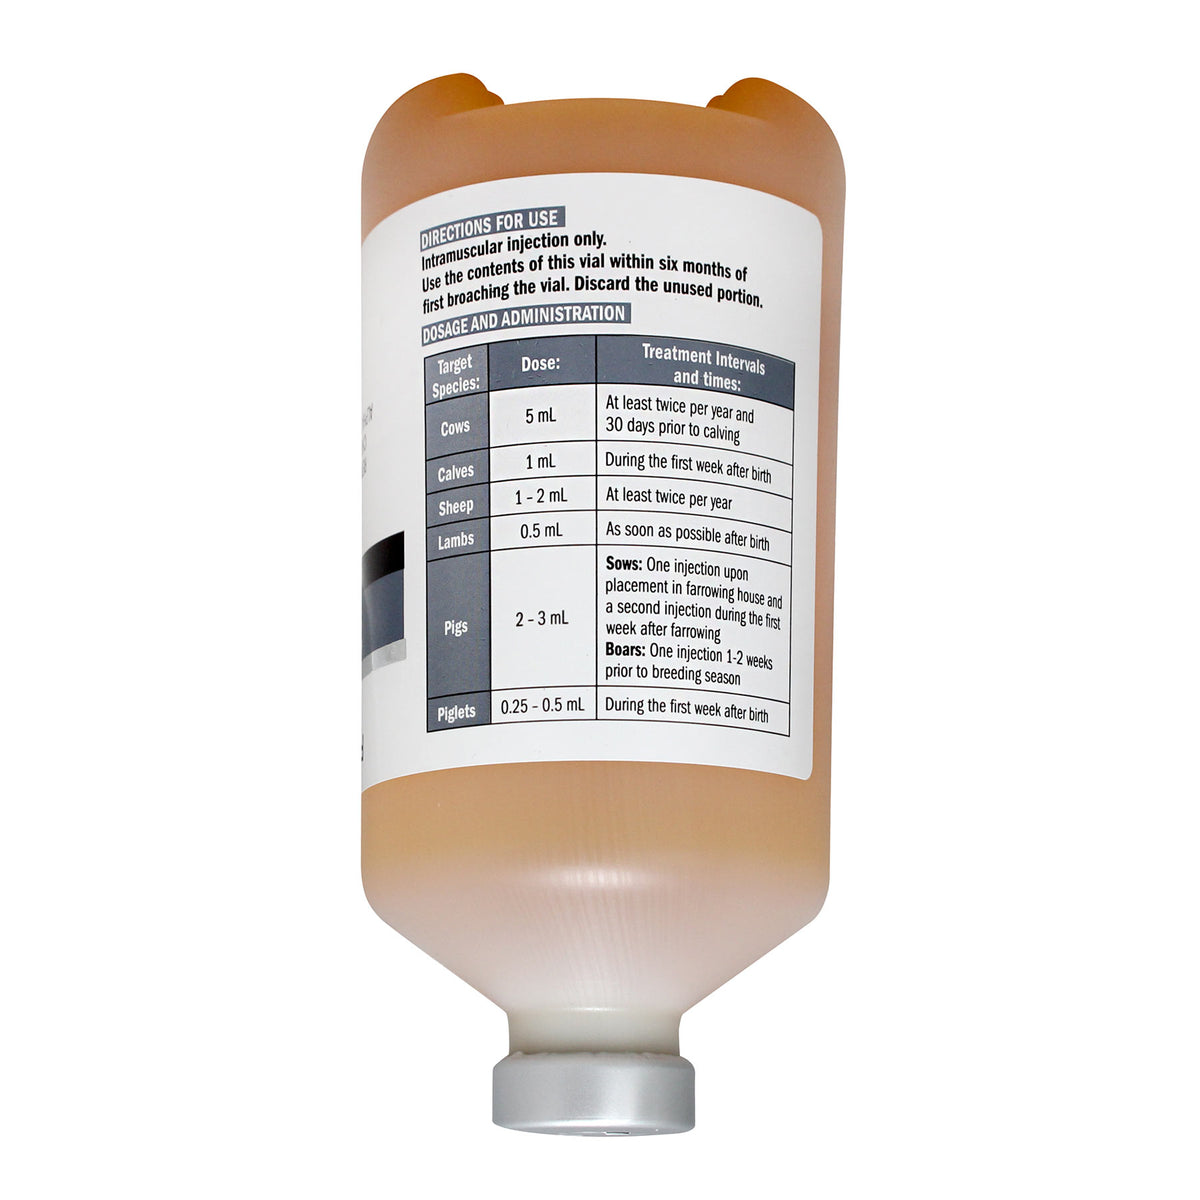 Troy Vitamin ADE Injection for Cattle, Sheep &amp; Pigs